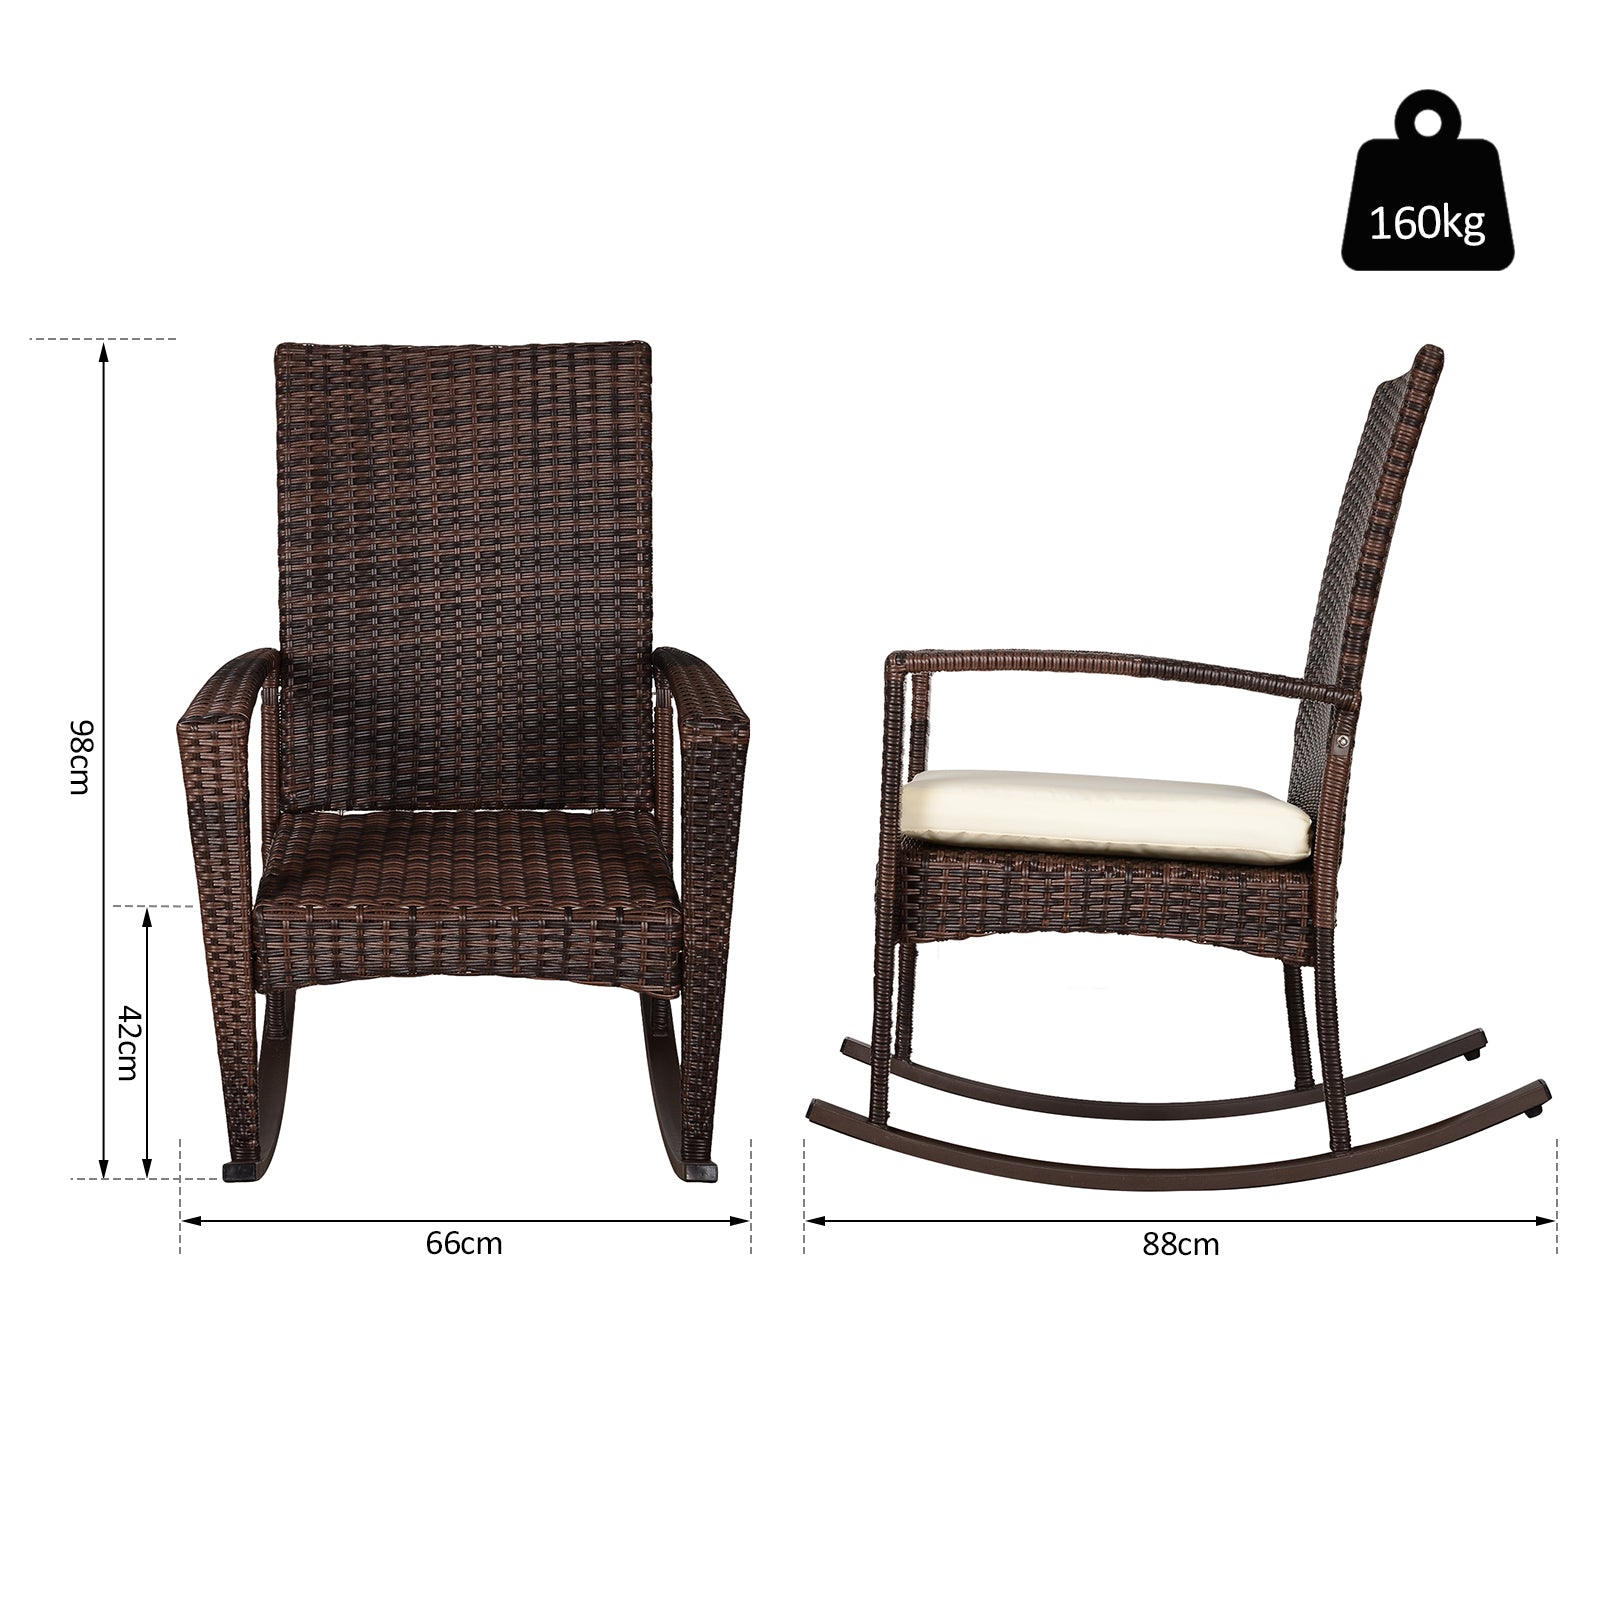 Outsunny Rattan Rocking Chair Rocker Garden Furniture Seater Patio Bistro Relaxer Outdoor Wicker Weave with Cushion - Brown - Inspirely